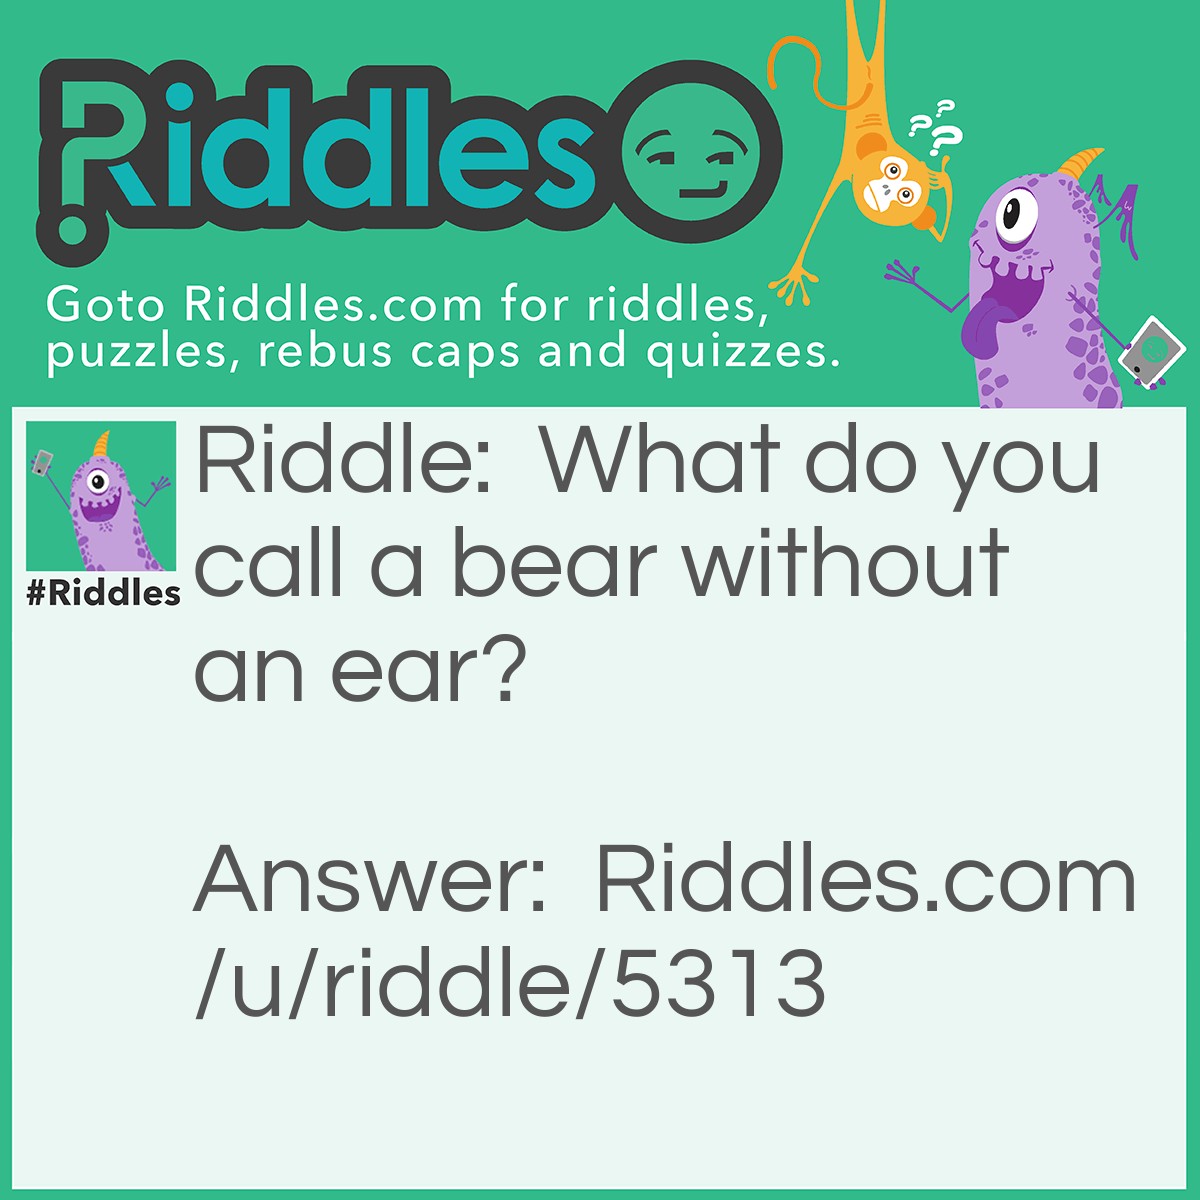 Riddle: What do you call a bear without an ear? Answer: "B".